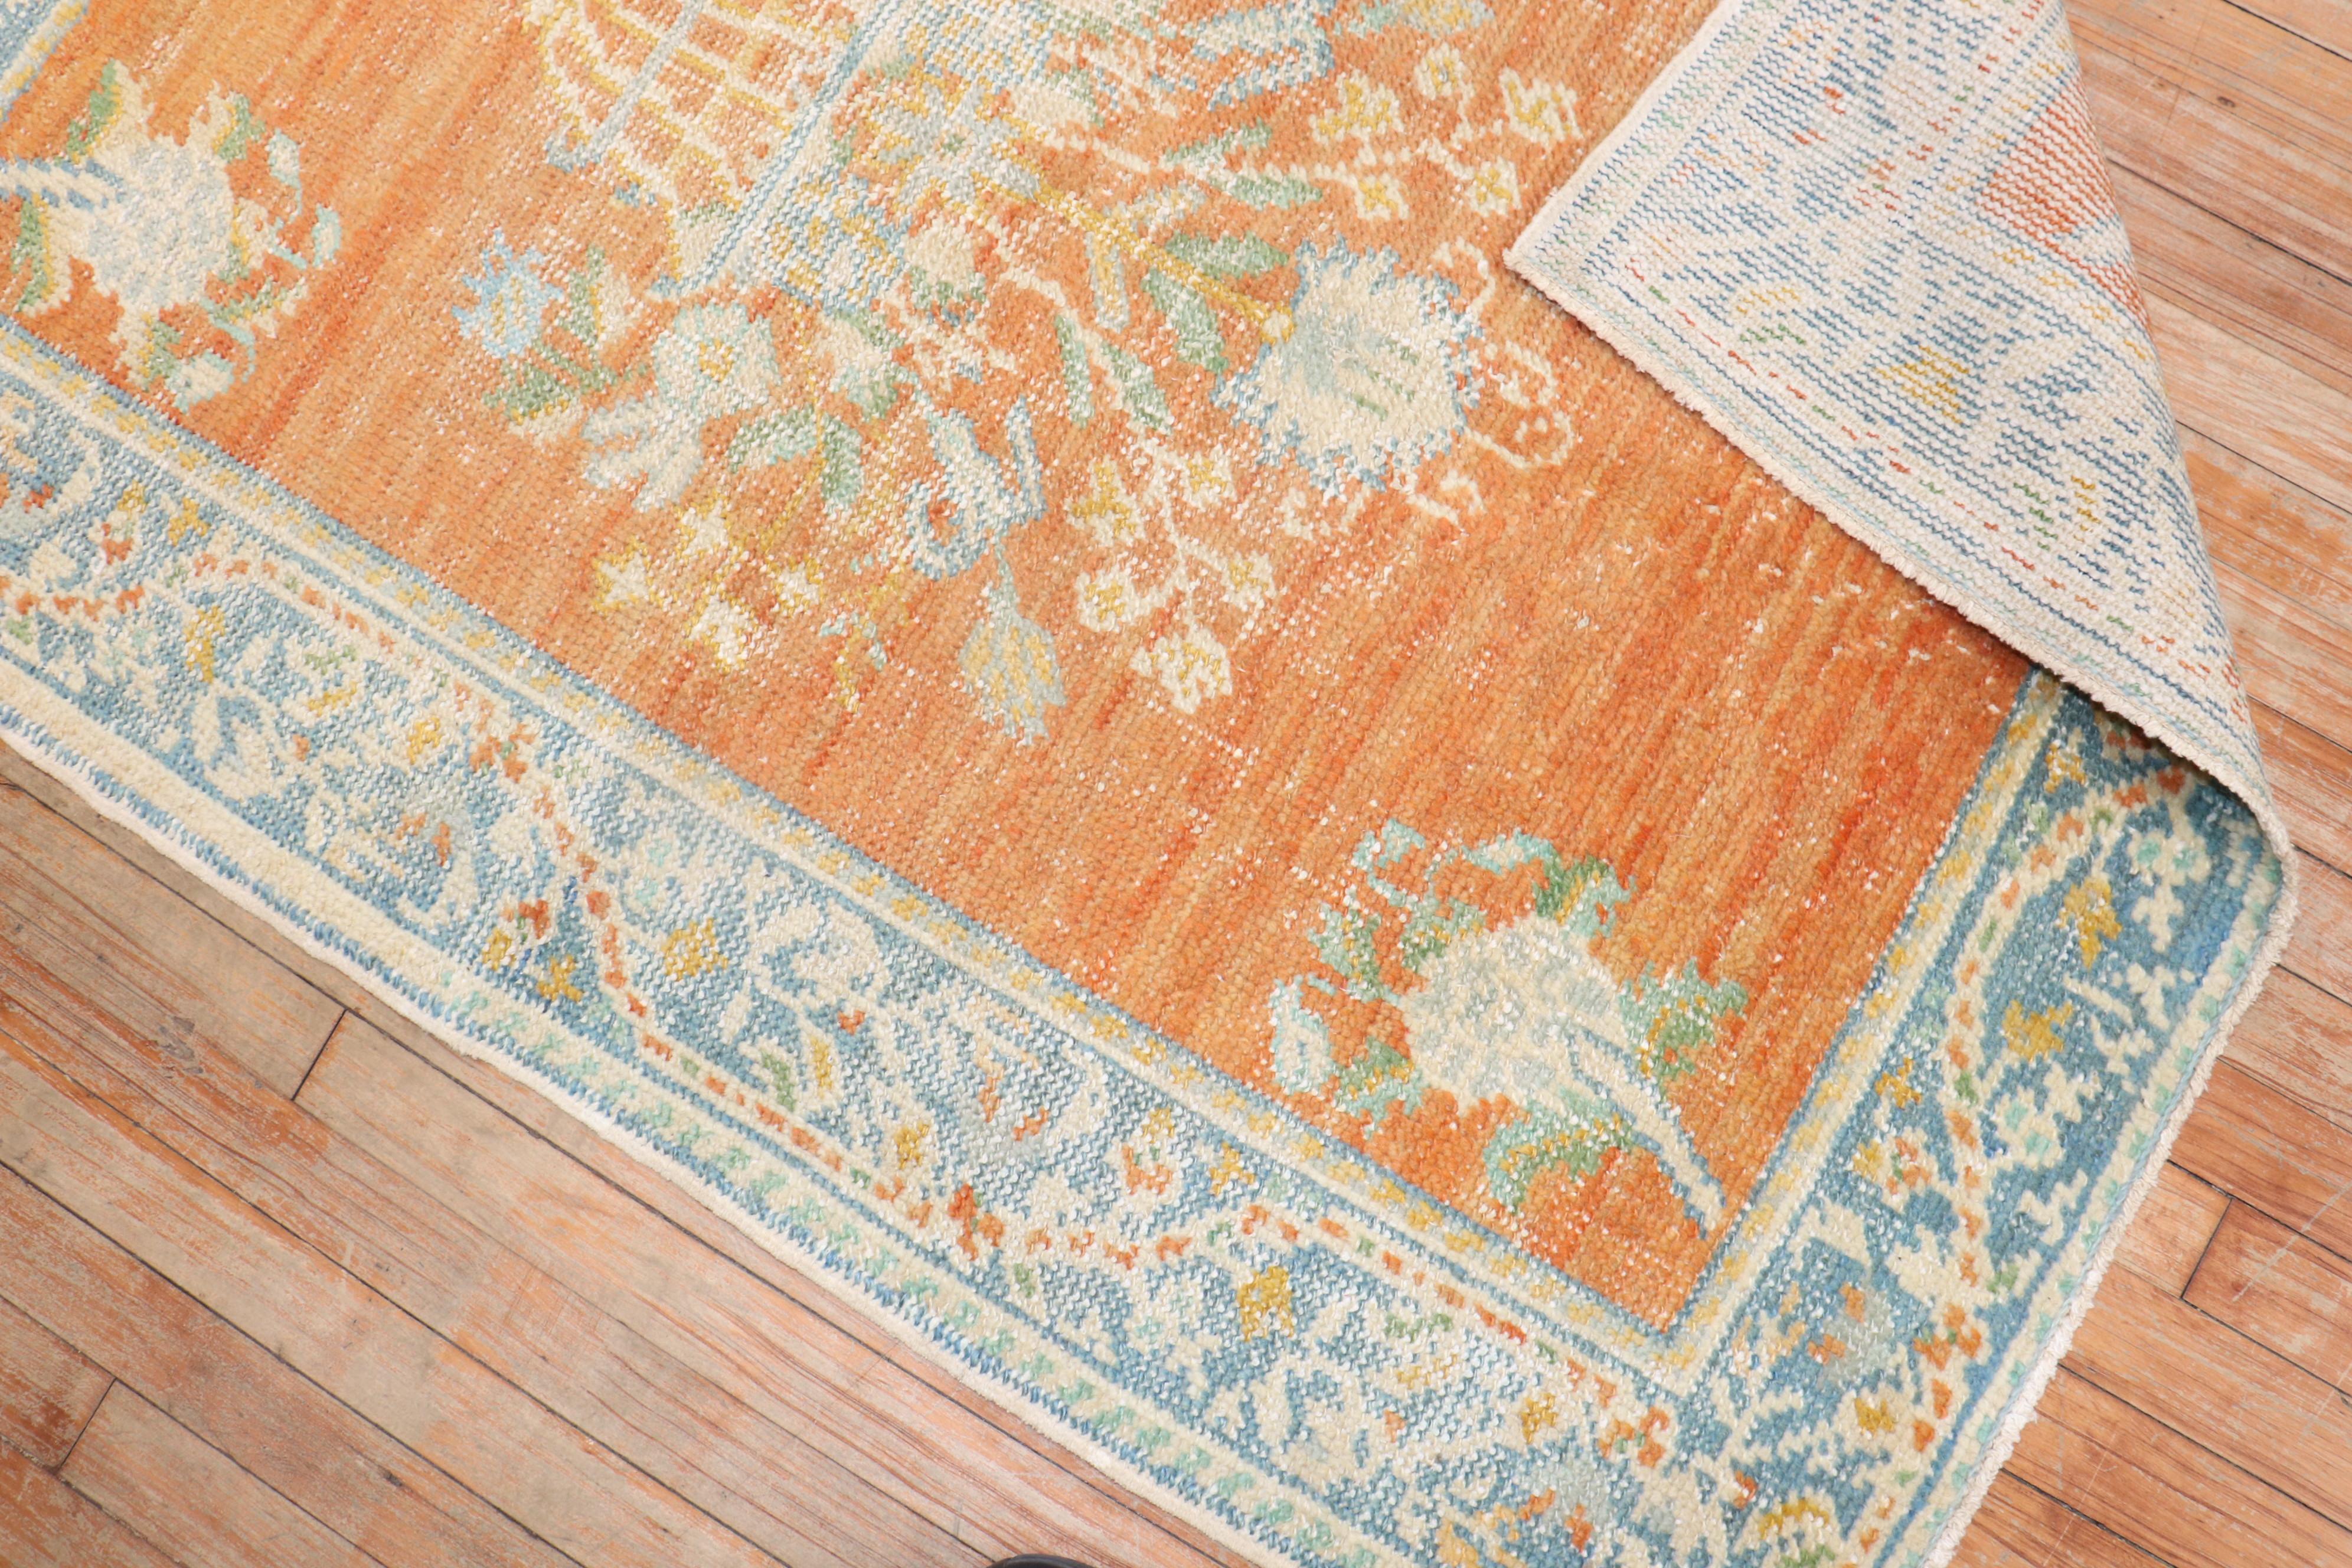 An early 20th-century orange field antique Oushak scatter size rug

Measures: 3'7” x 4'10”.